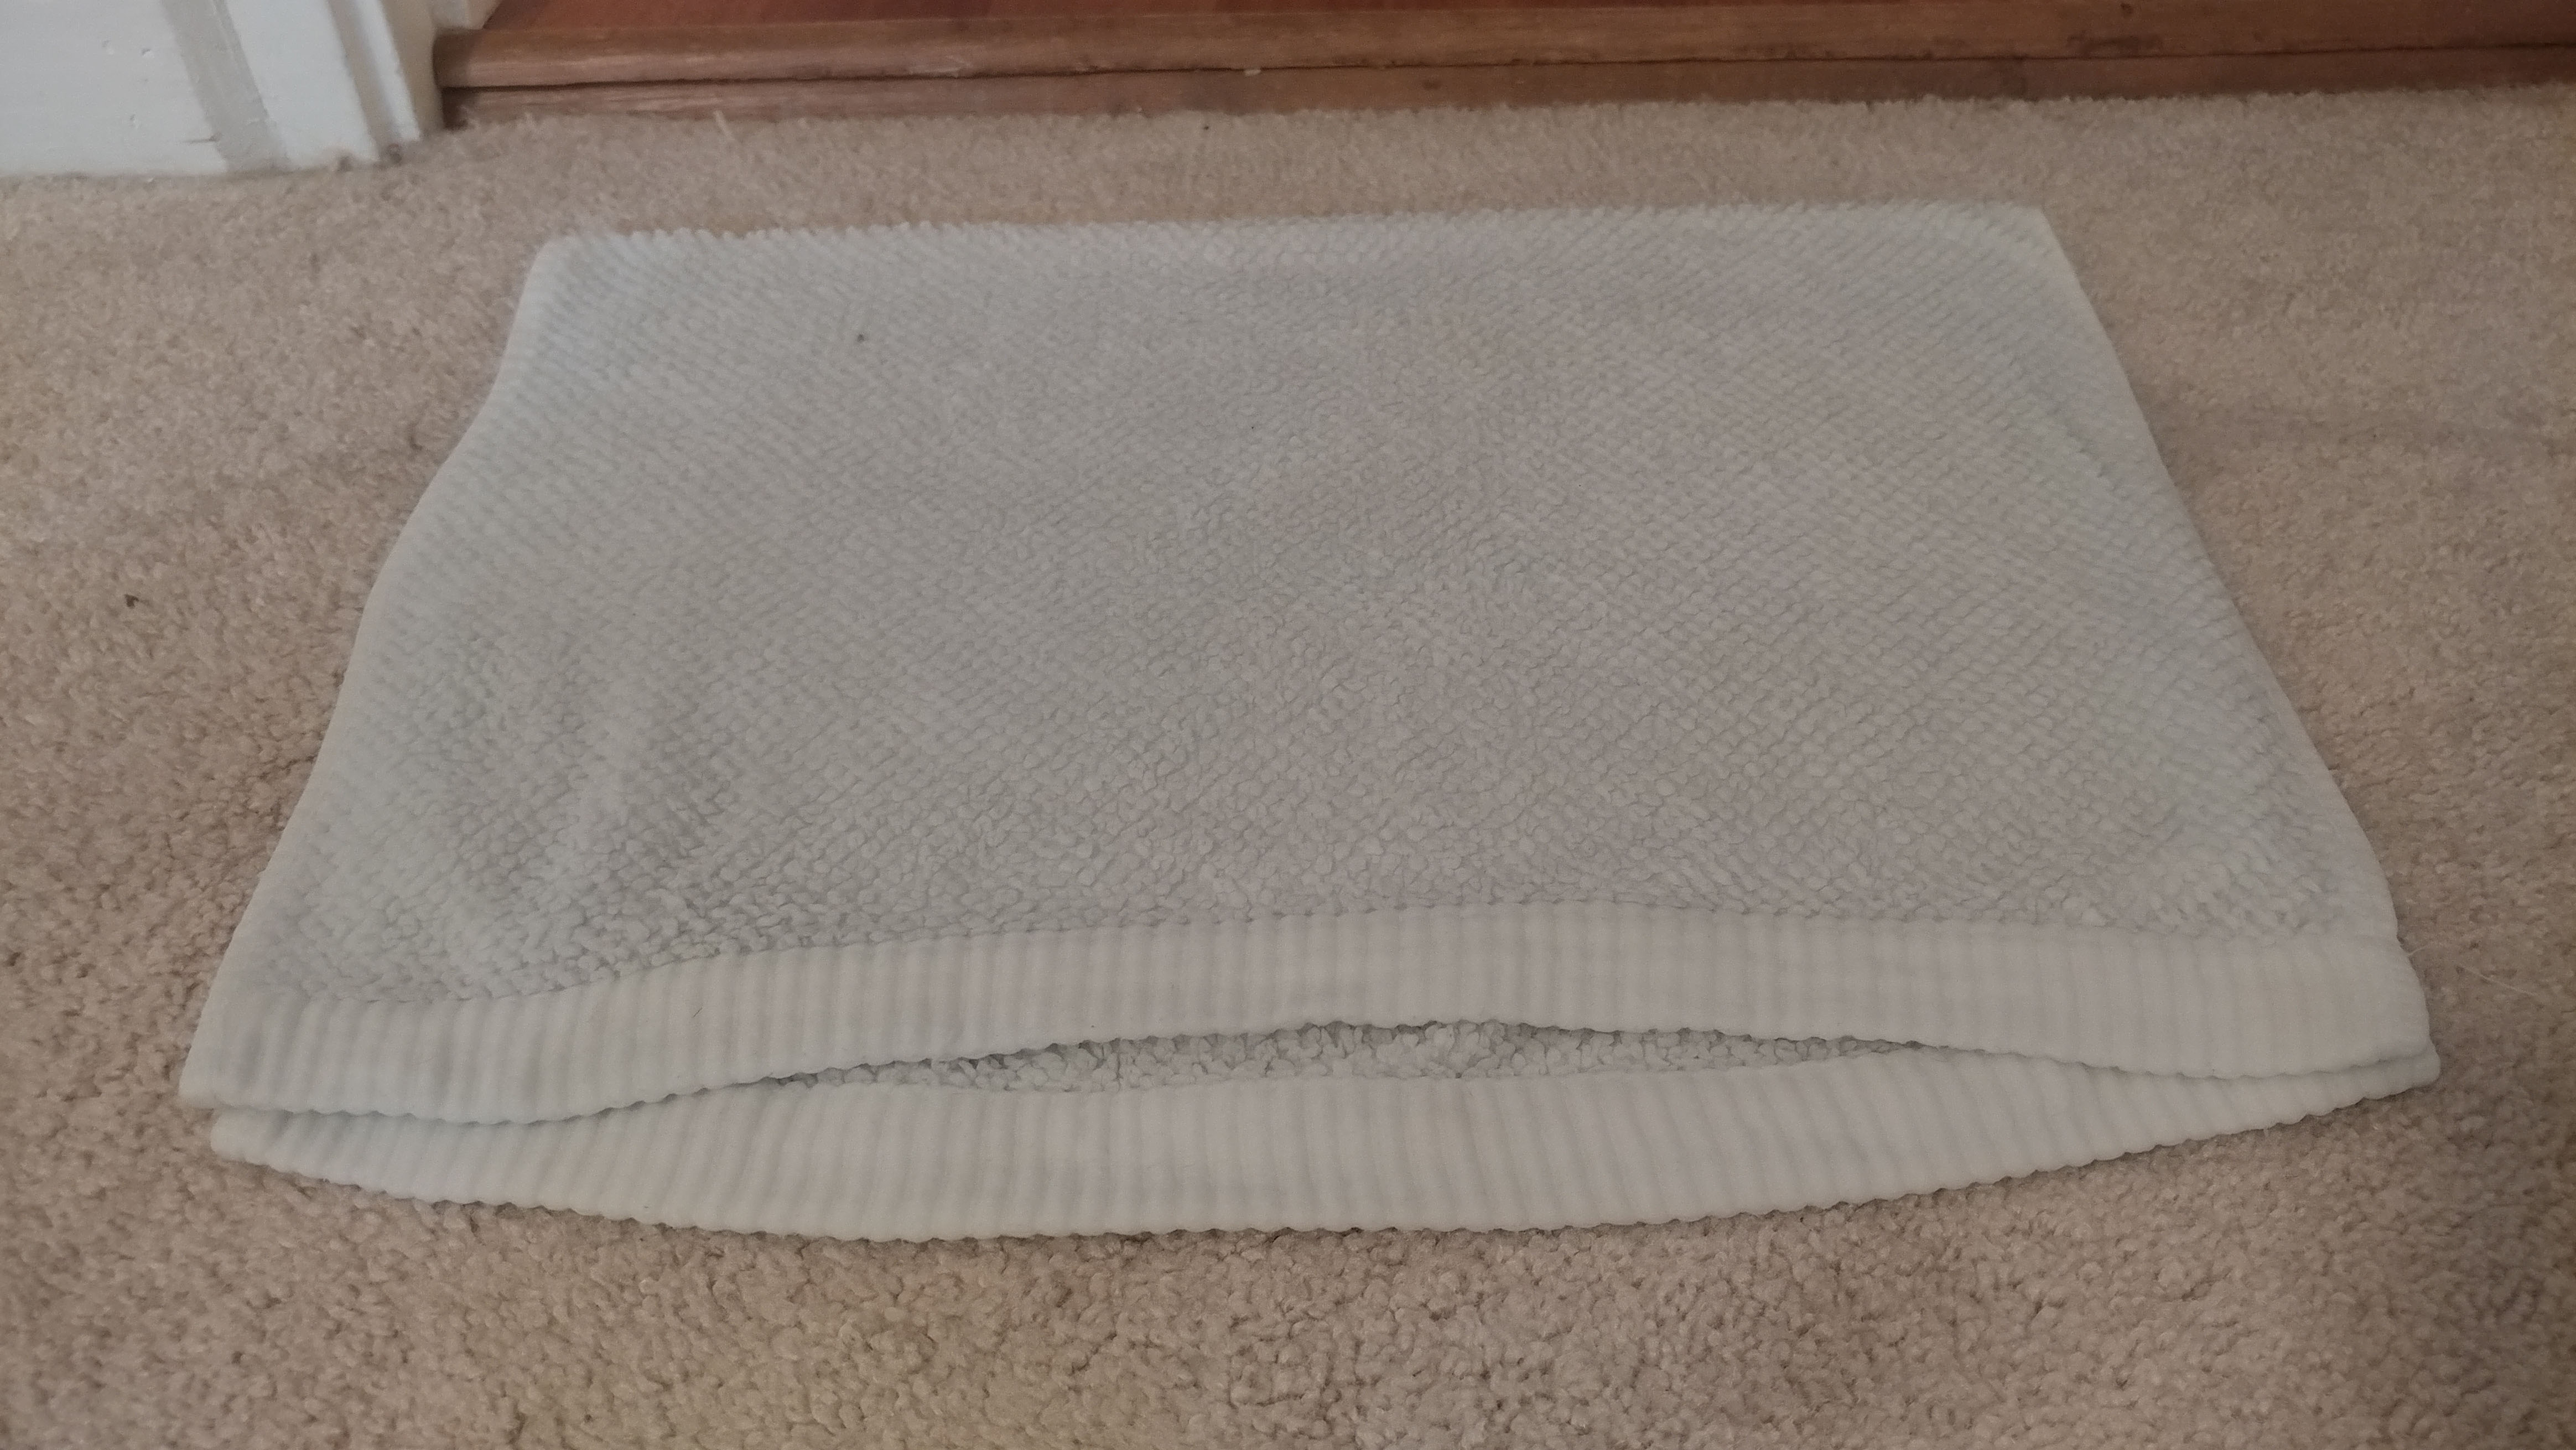 Step 2: Soak an old towel or rag in hot water and lay it on top of the stain.